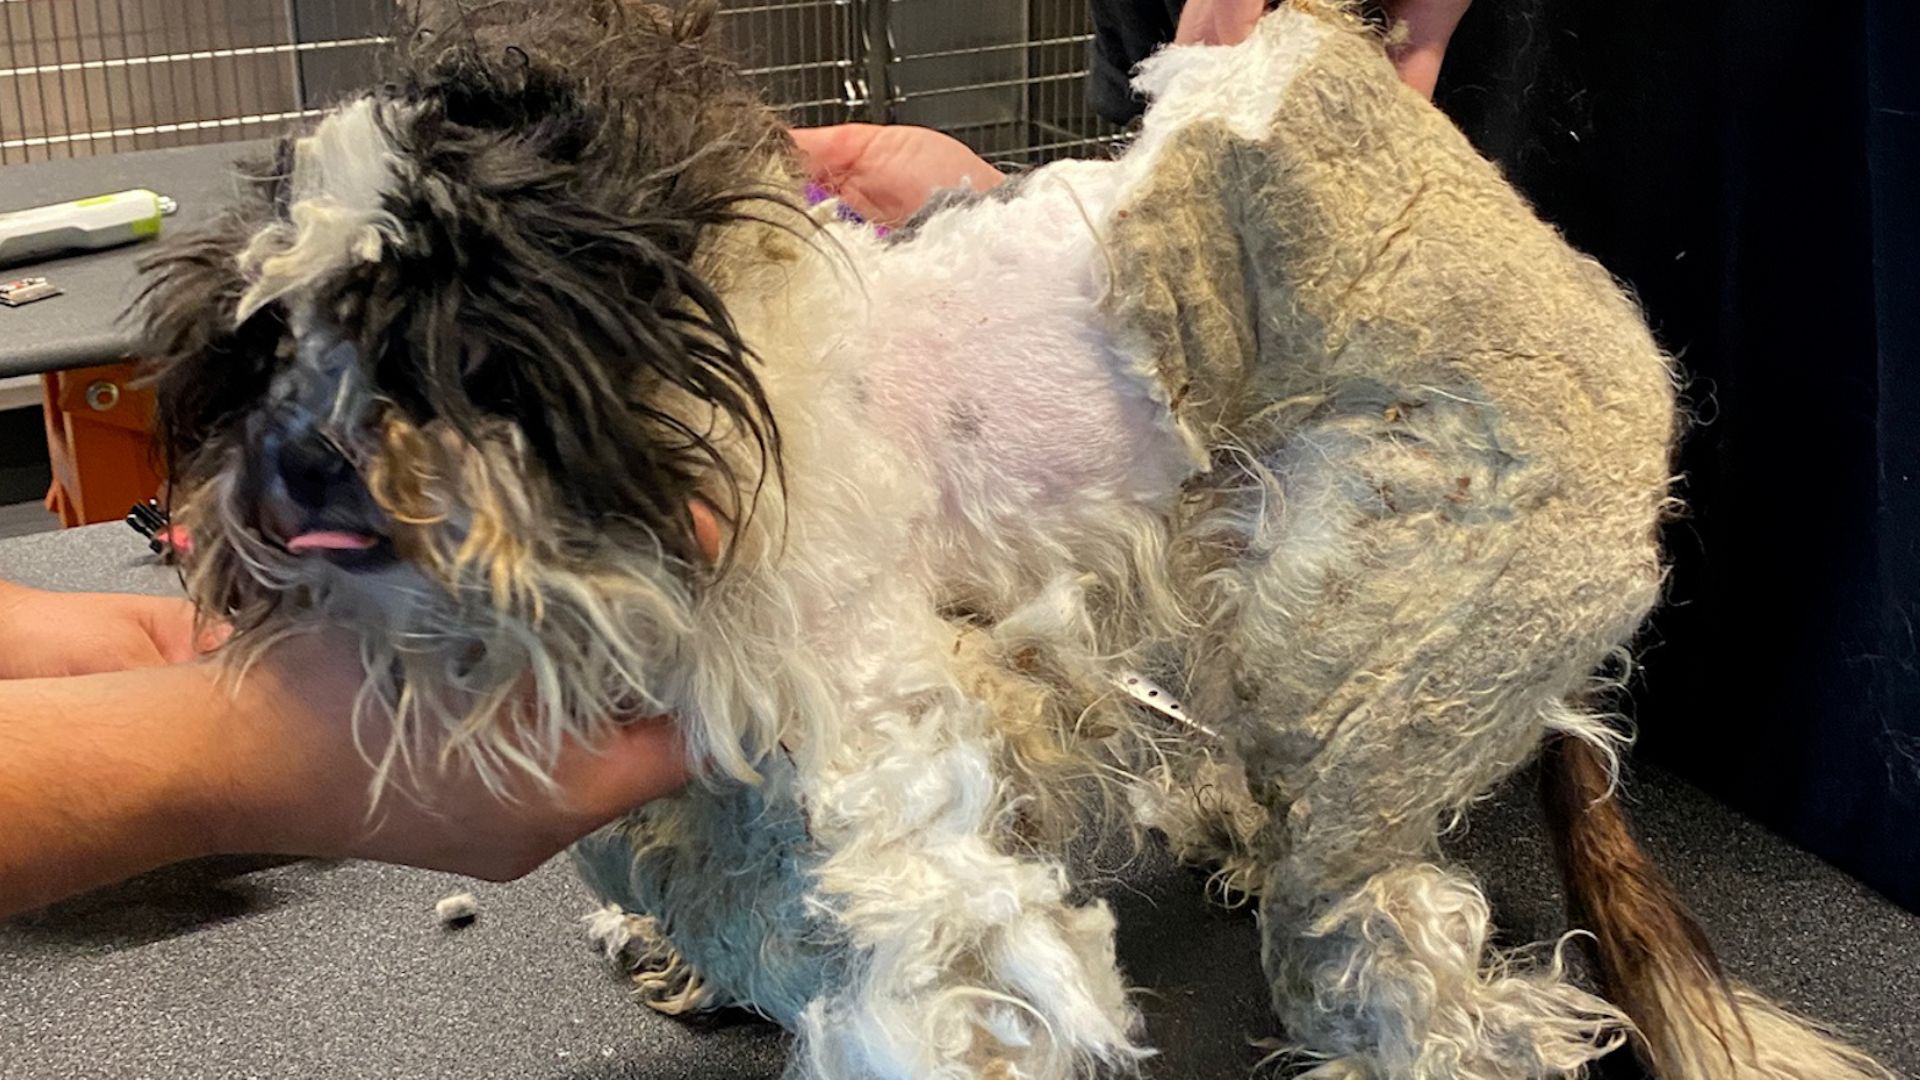 Rescuers Saved A Severely Matted Animal And Later Discovered It Was Actually A Dog